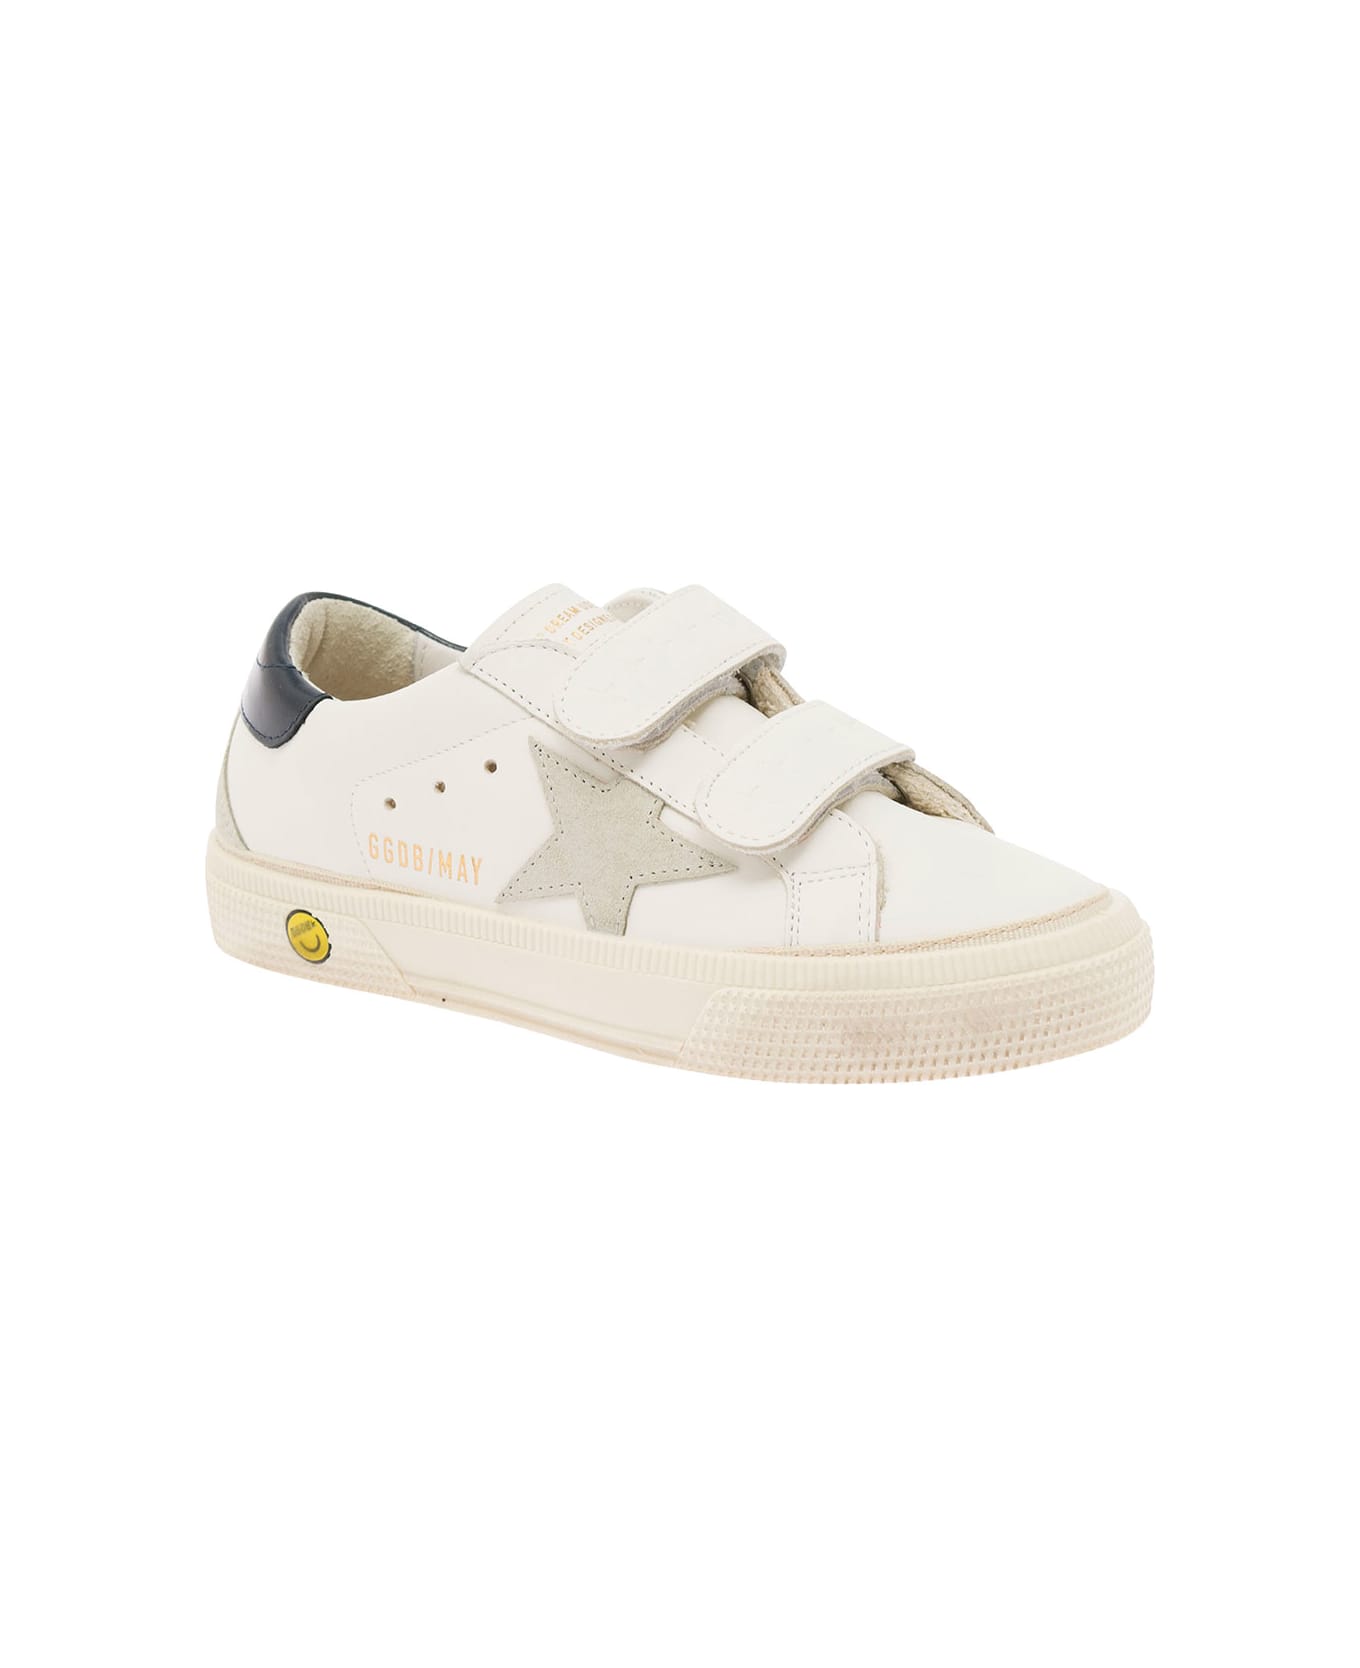 Golden Goose May School Leather Upper And Heel Suede Star And Spur Include Stesso Codice Gyf - White